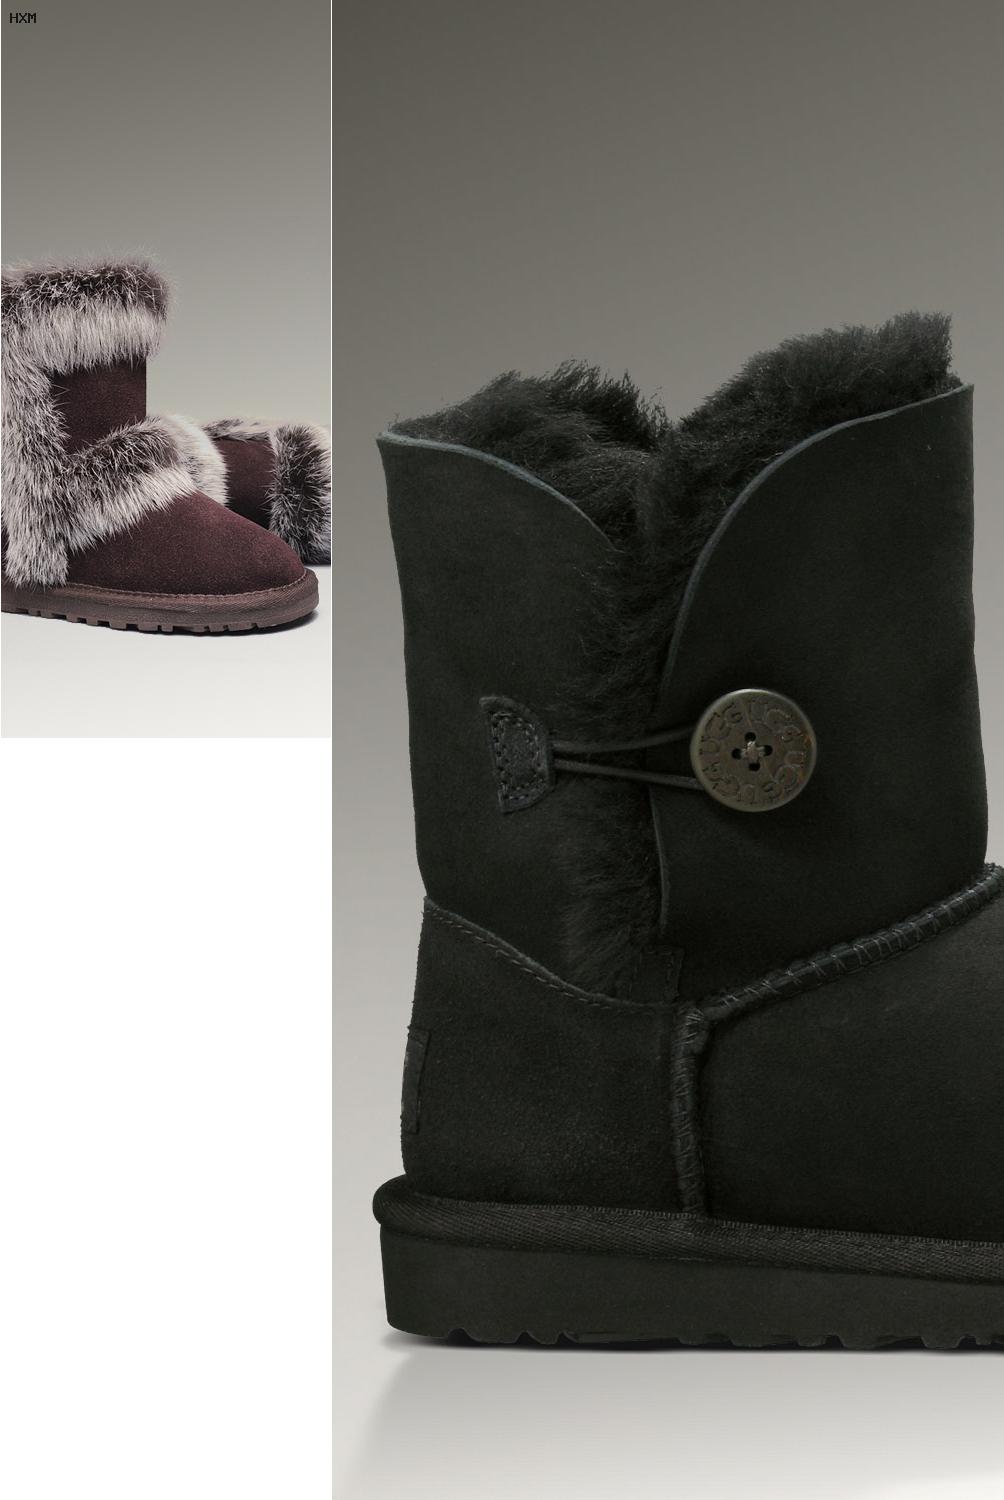 mens ugg style boots uk